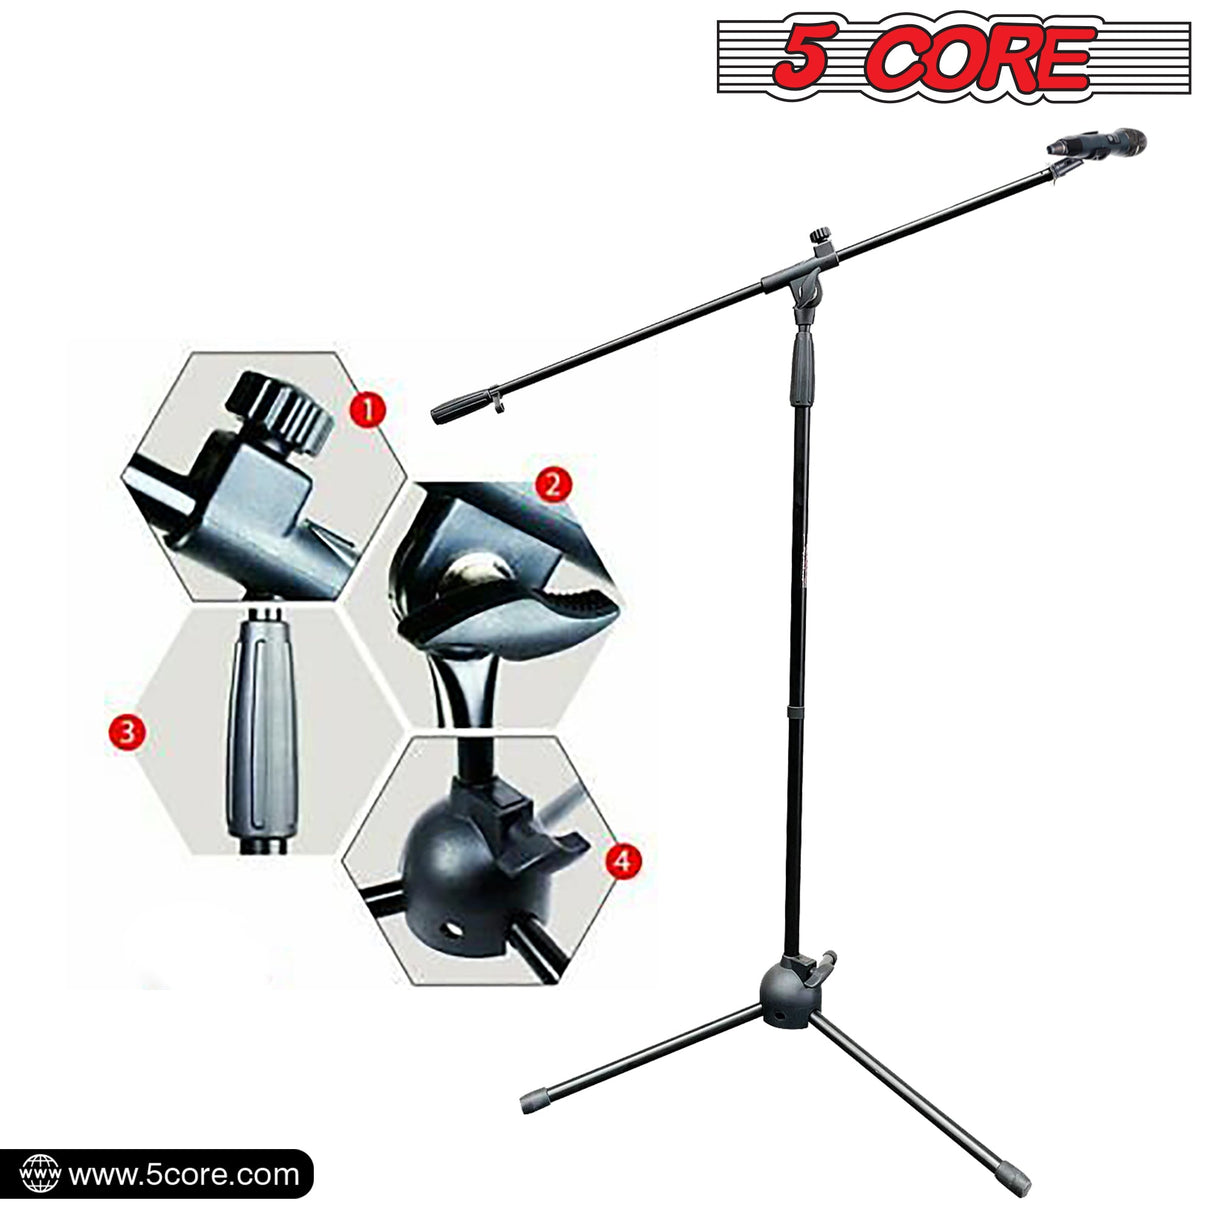 5 Core 4 Pieces Foldable Tripod Microphone Stand - Universal Mic Mount, Height Adjustable from 36 to 65 Inch w/ Extending 30” Telescoping Boom Arm - Knob Tension Lock Mechanism w/ Mic Clip MS 080 4pcs